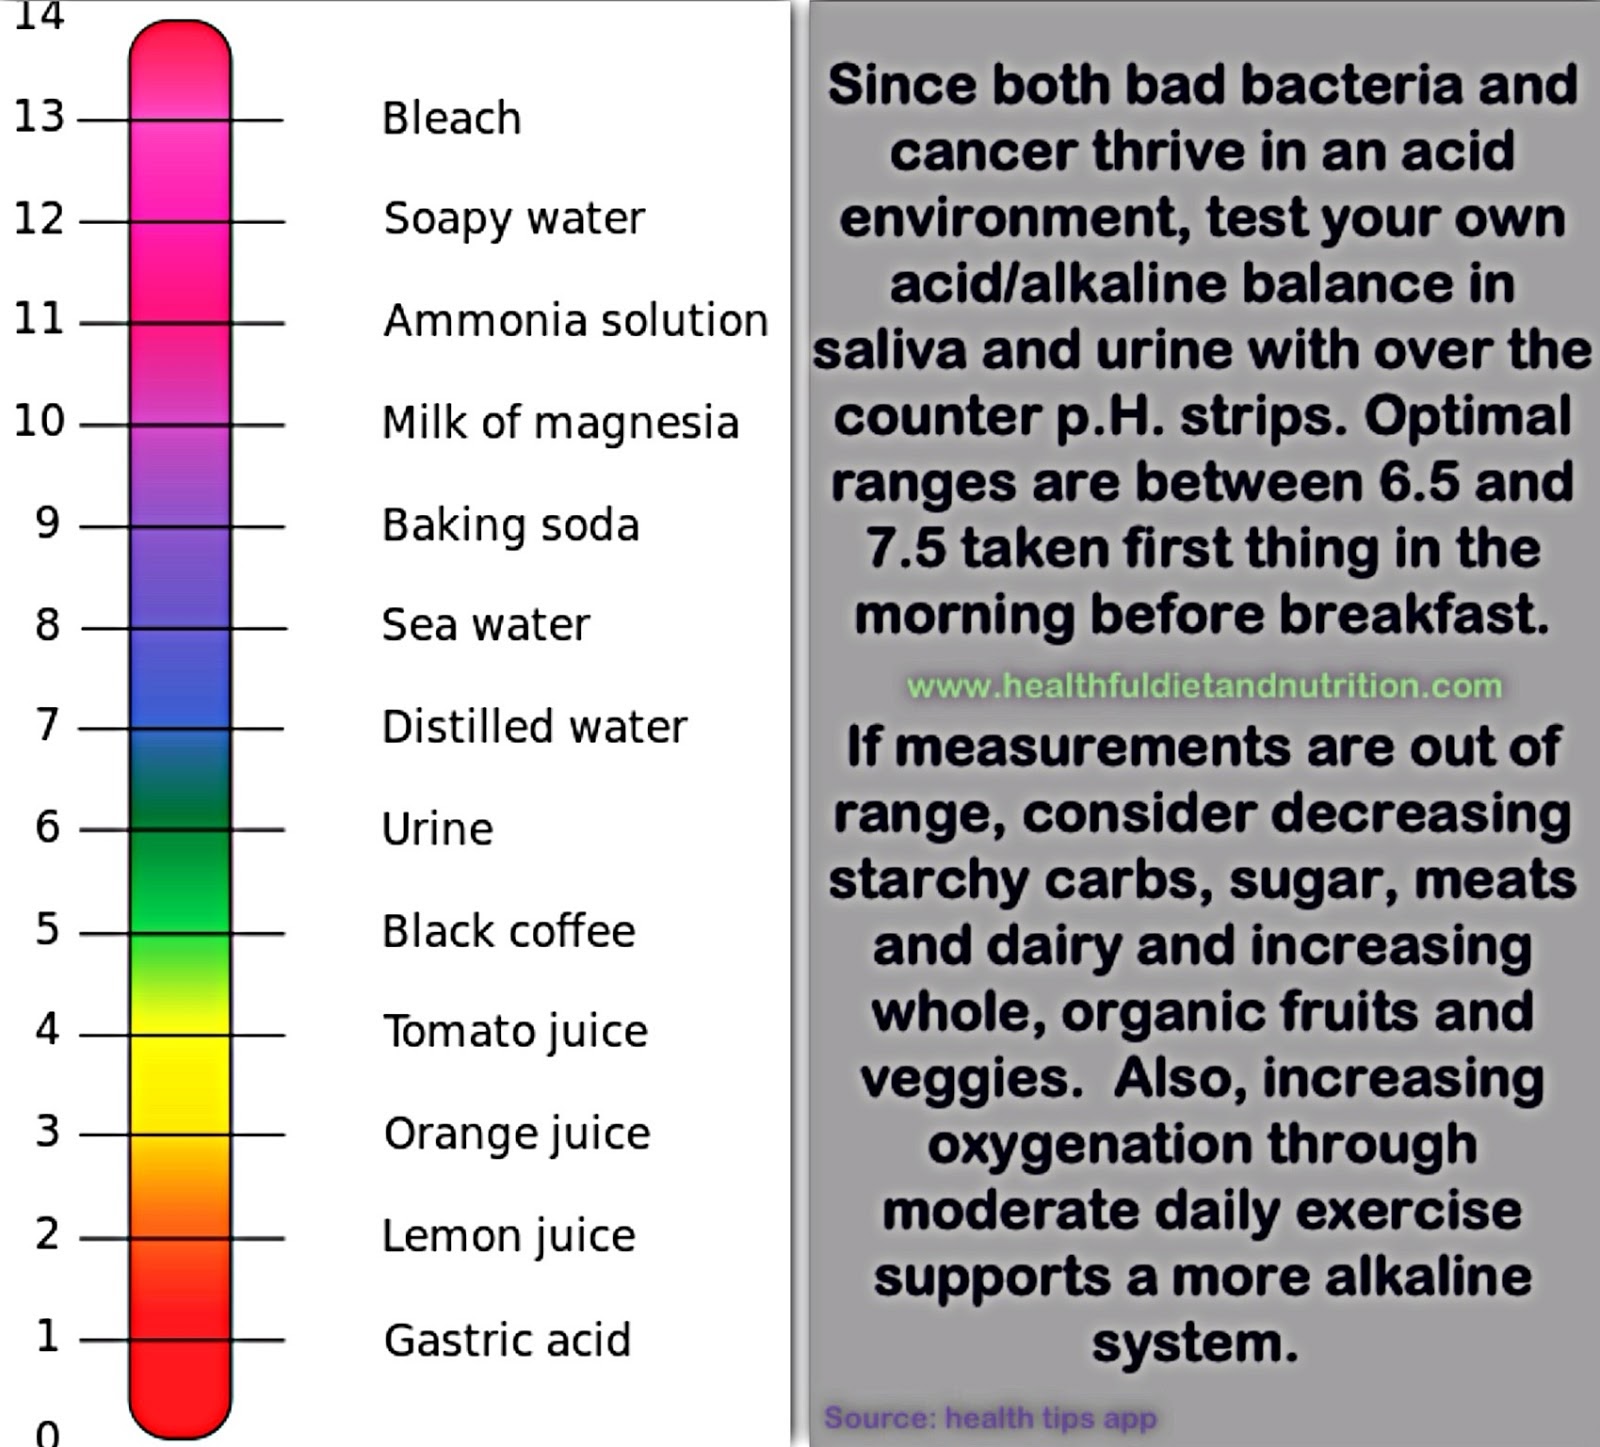 Maintain A Healthy Acid/Alkaline Balance In the Body